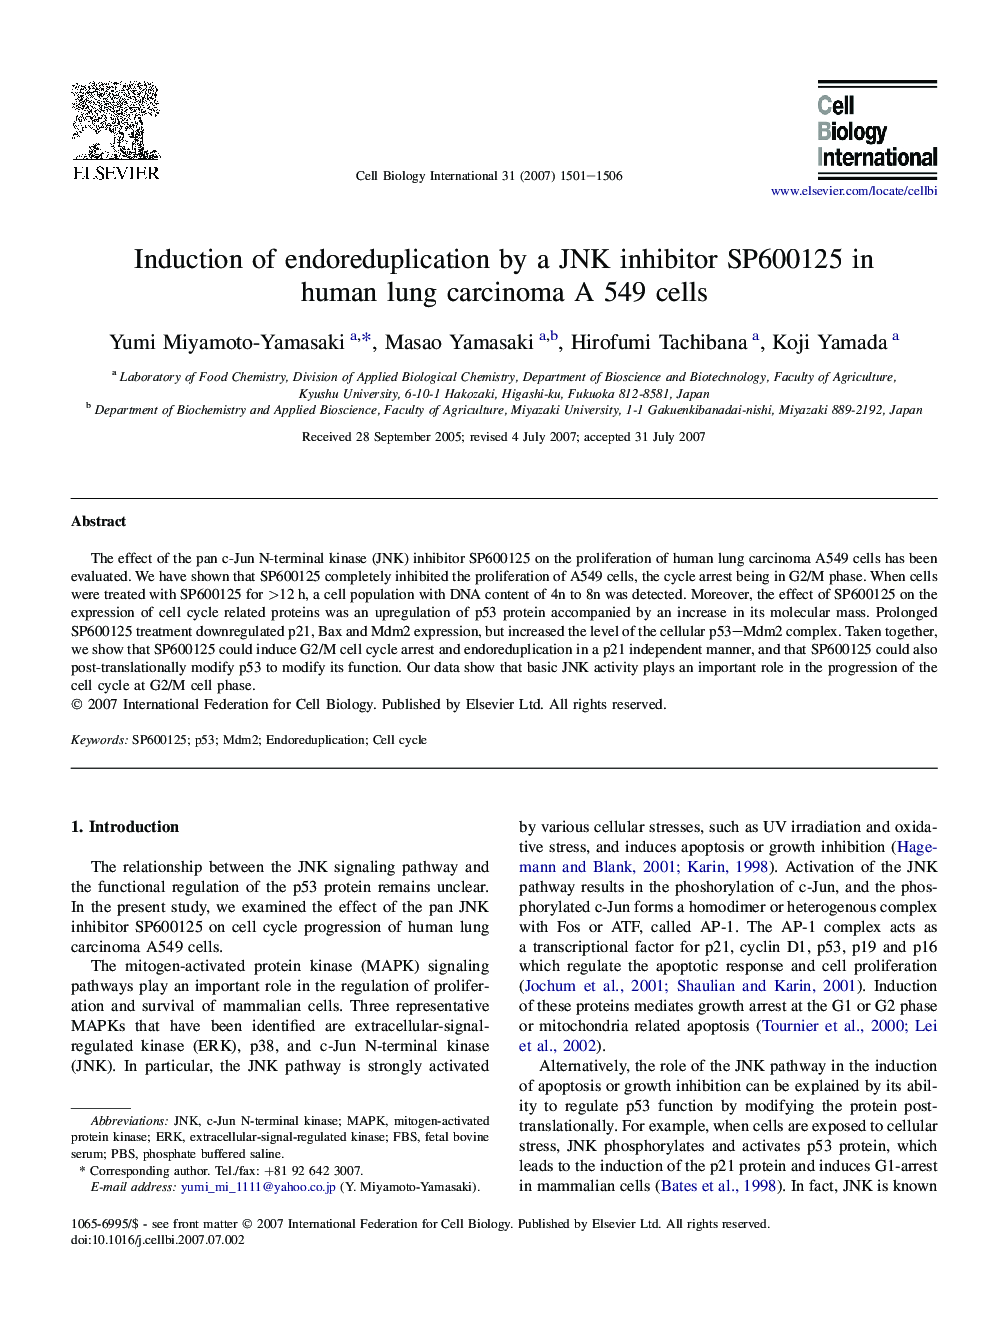 Induction of endoreduplication by a JNK inhibitor SP600125 in human lung carcinoma A 549 cells